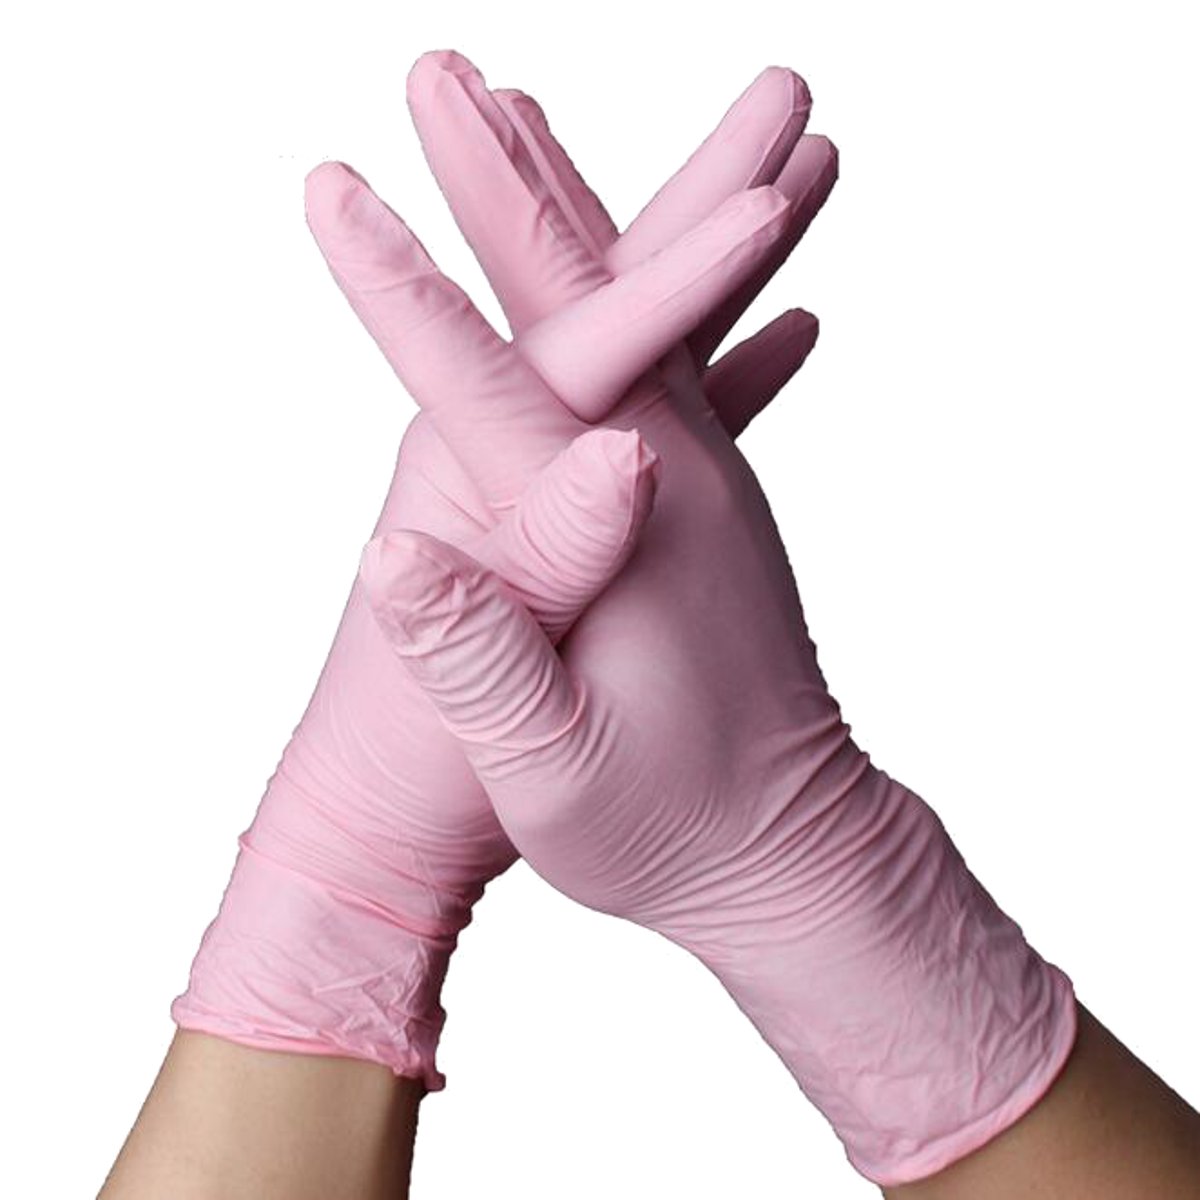 

100Pcs S/M/L Disposable Nitrile Gloves Rubber Latex Cleaning Mechanic Medical Glove